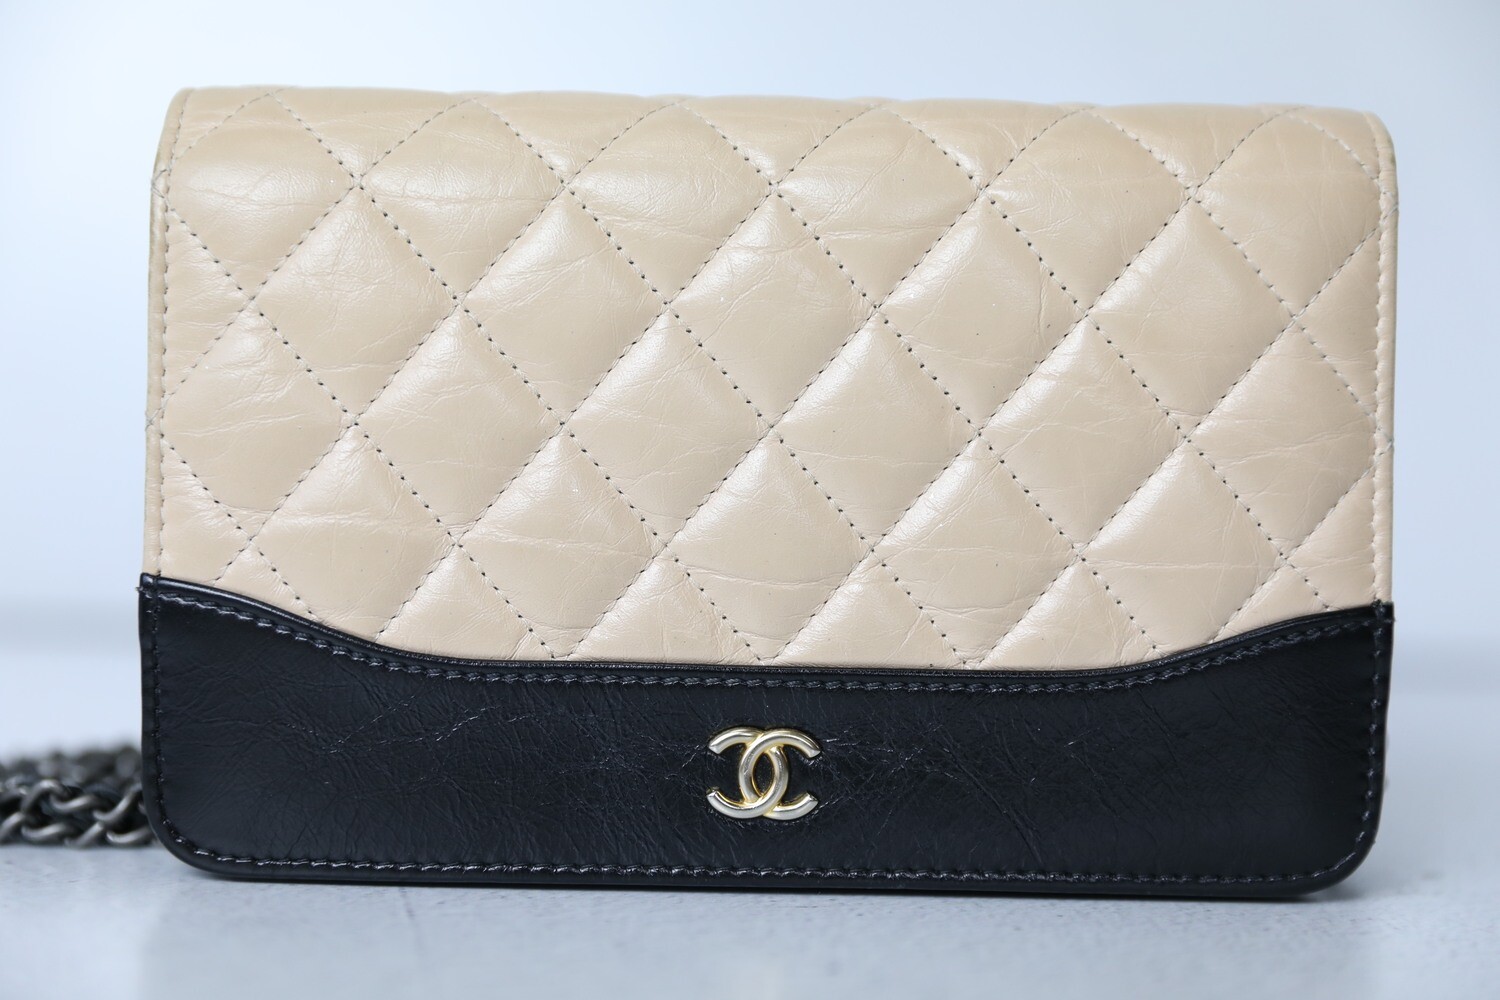 Chanel Gabrielle Wallet on Chain, Beige and Black, Preowned in